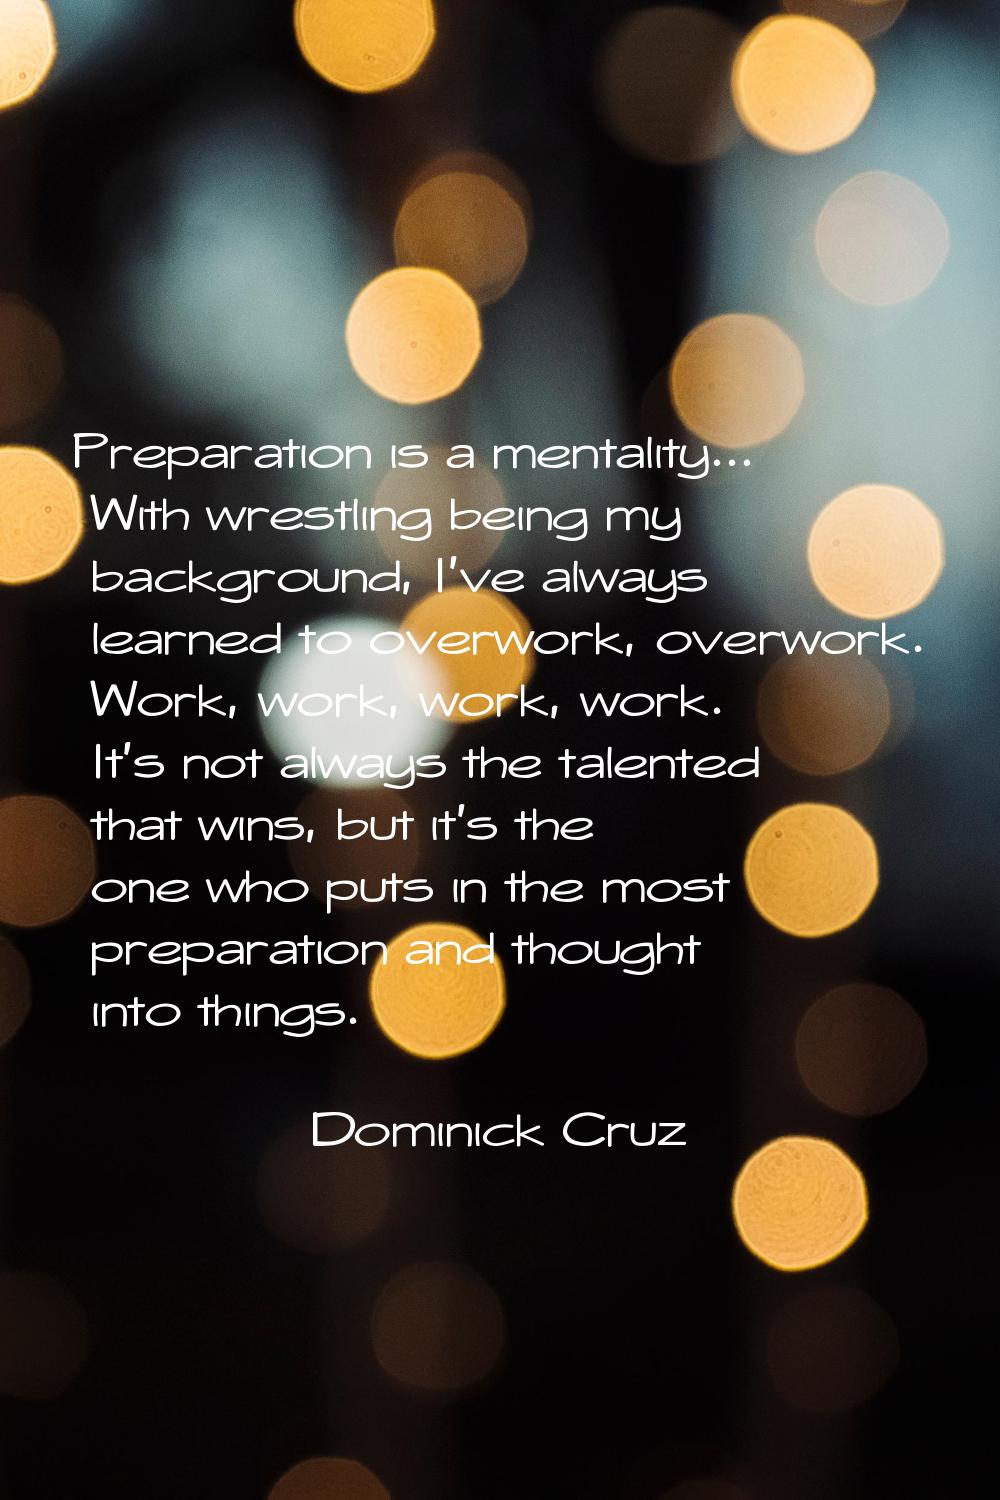 Preparation is a mentality... With wrestling being my background, I've always learned to overwork, 